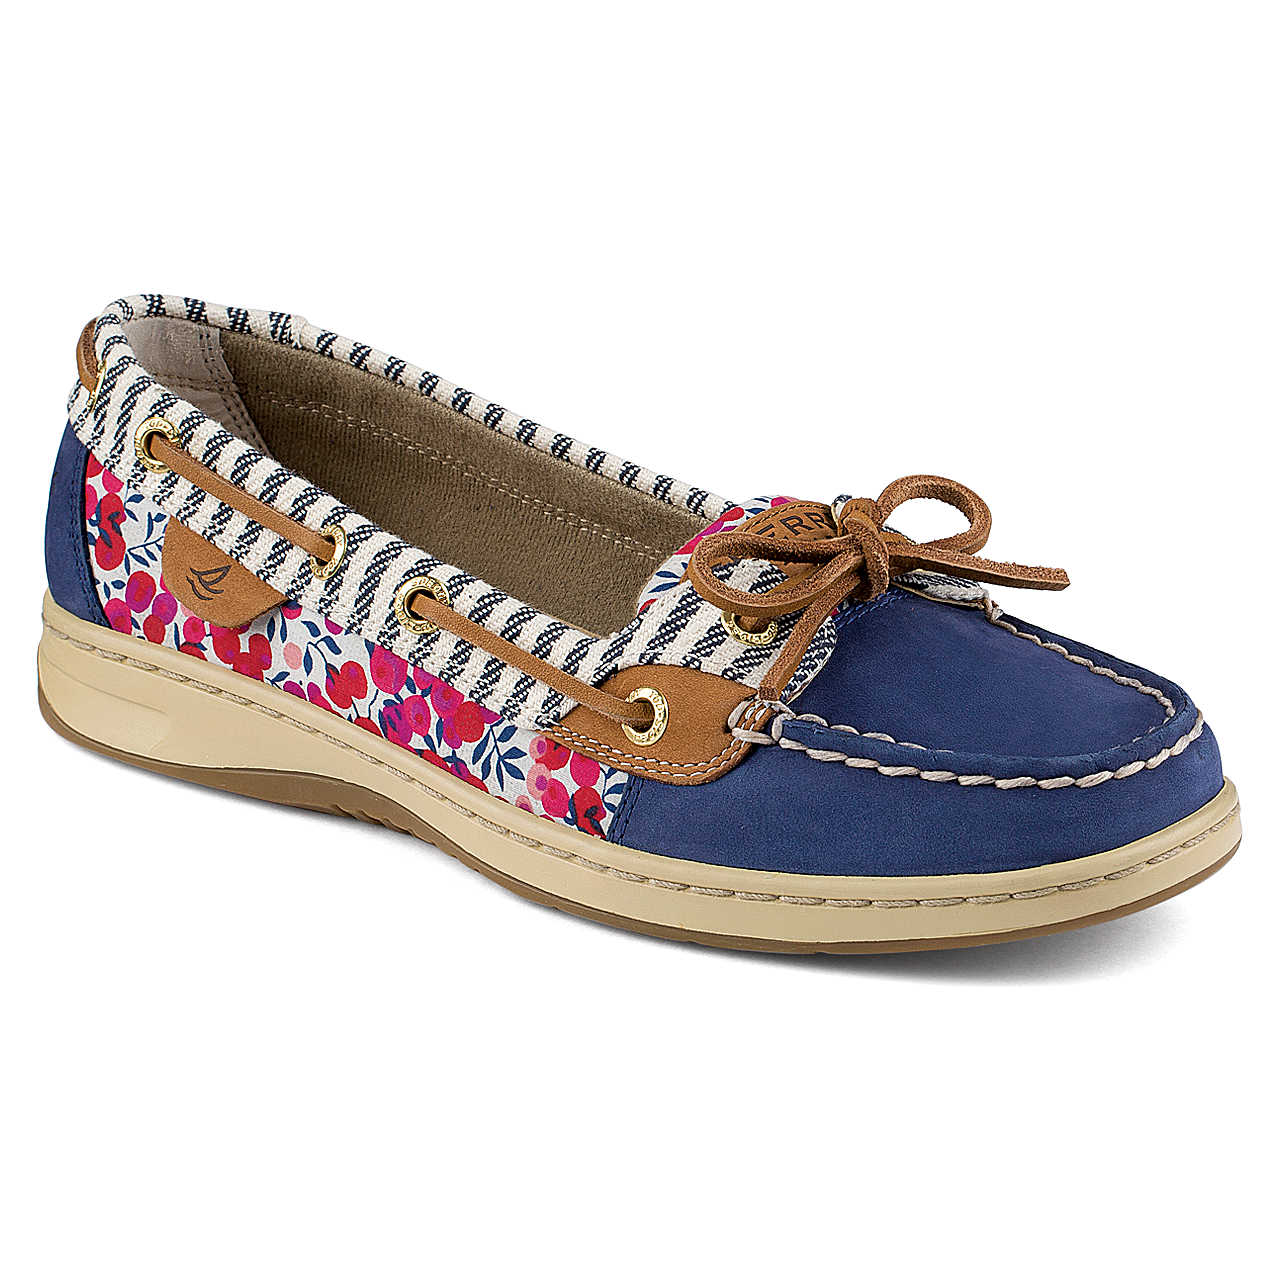 Women's Angelfish Liberty Floral Print Slip-On Boat Shoe - Sperry